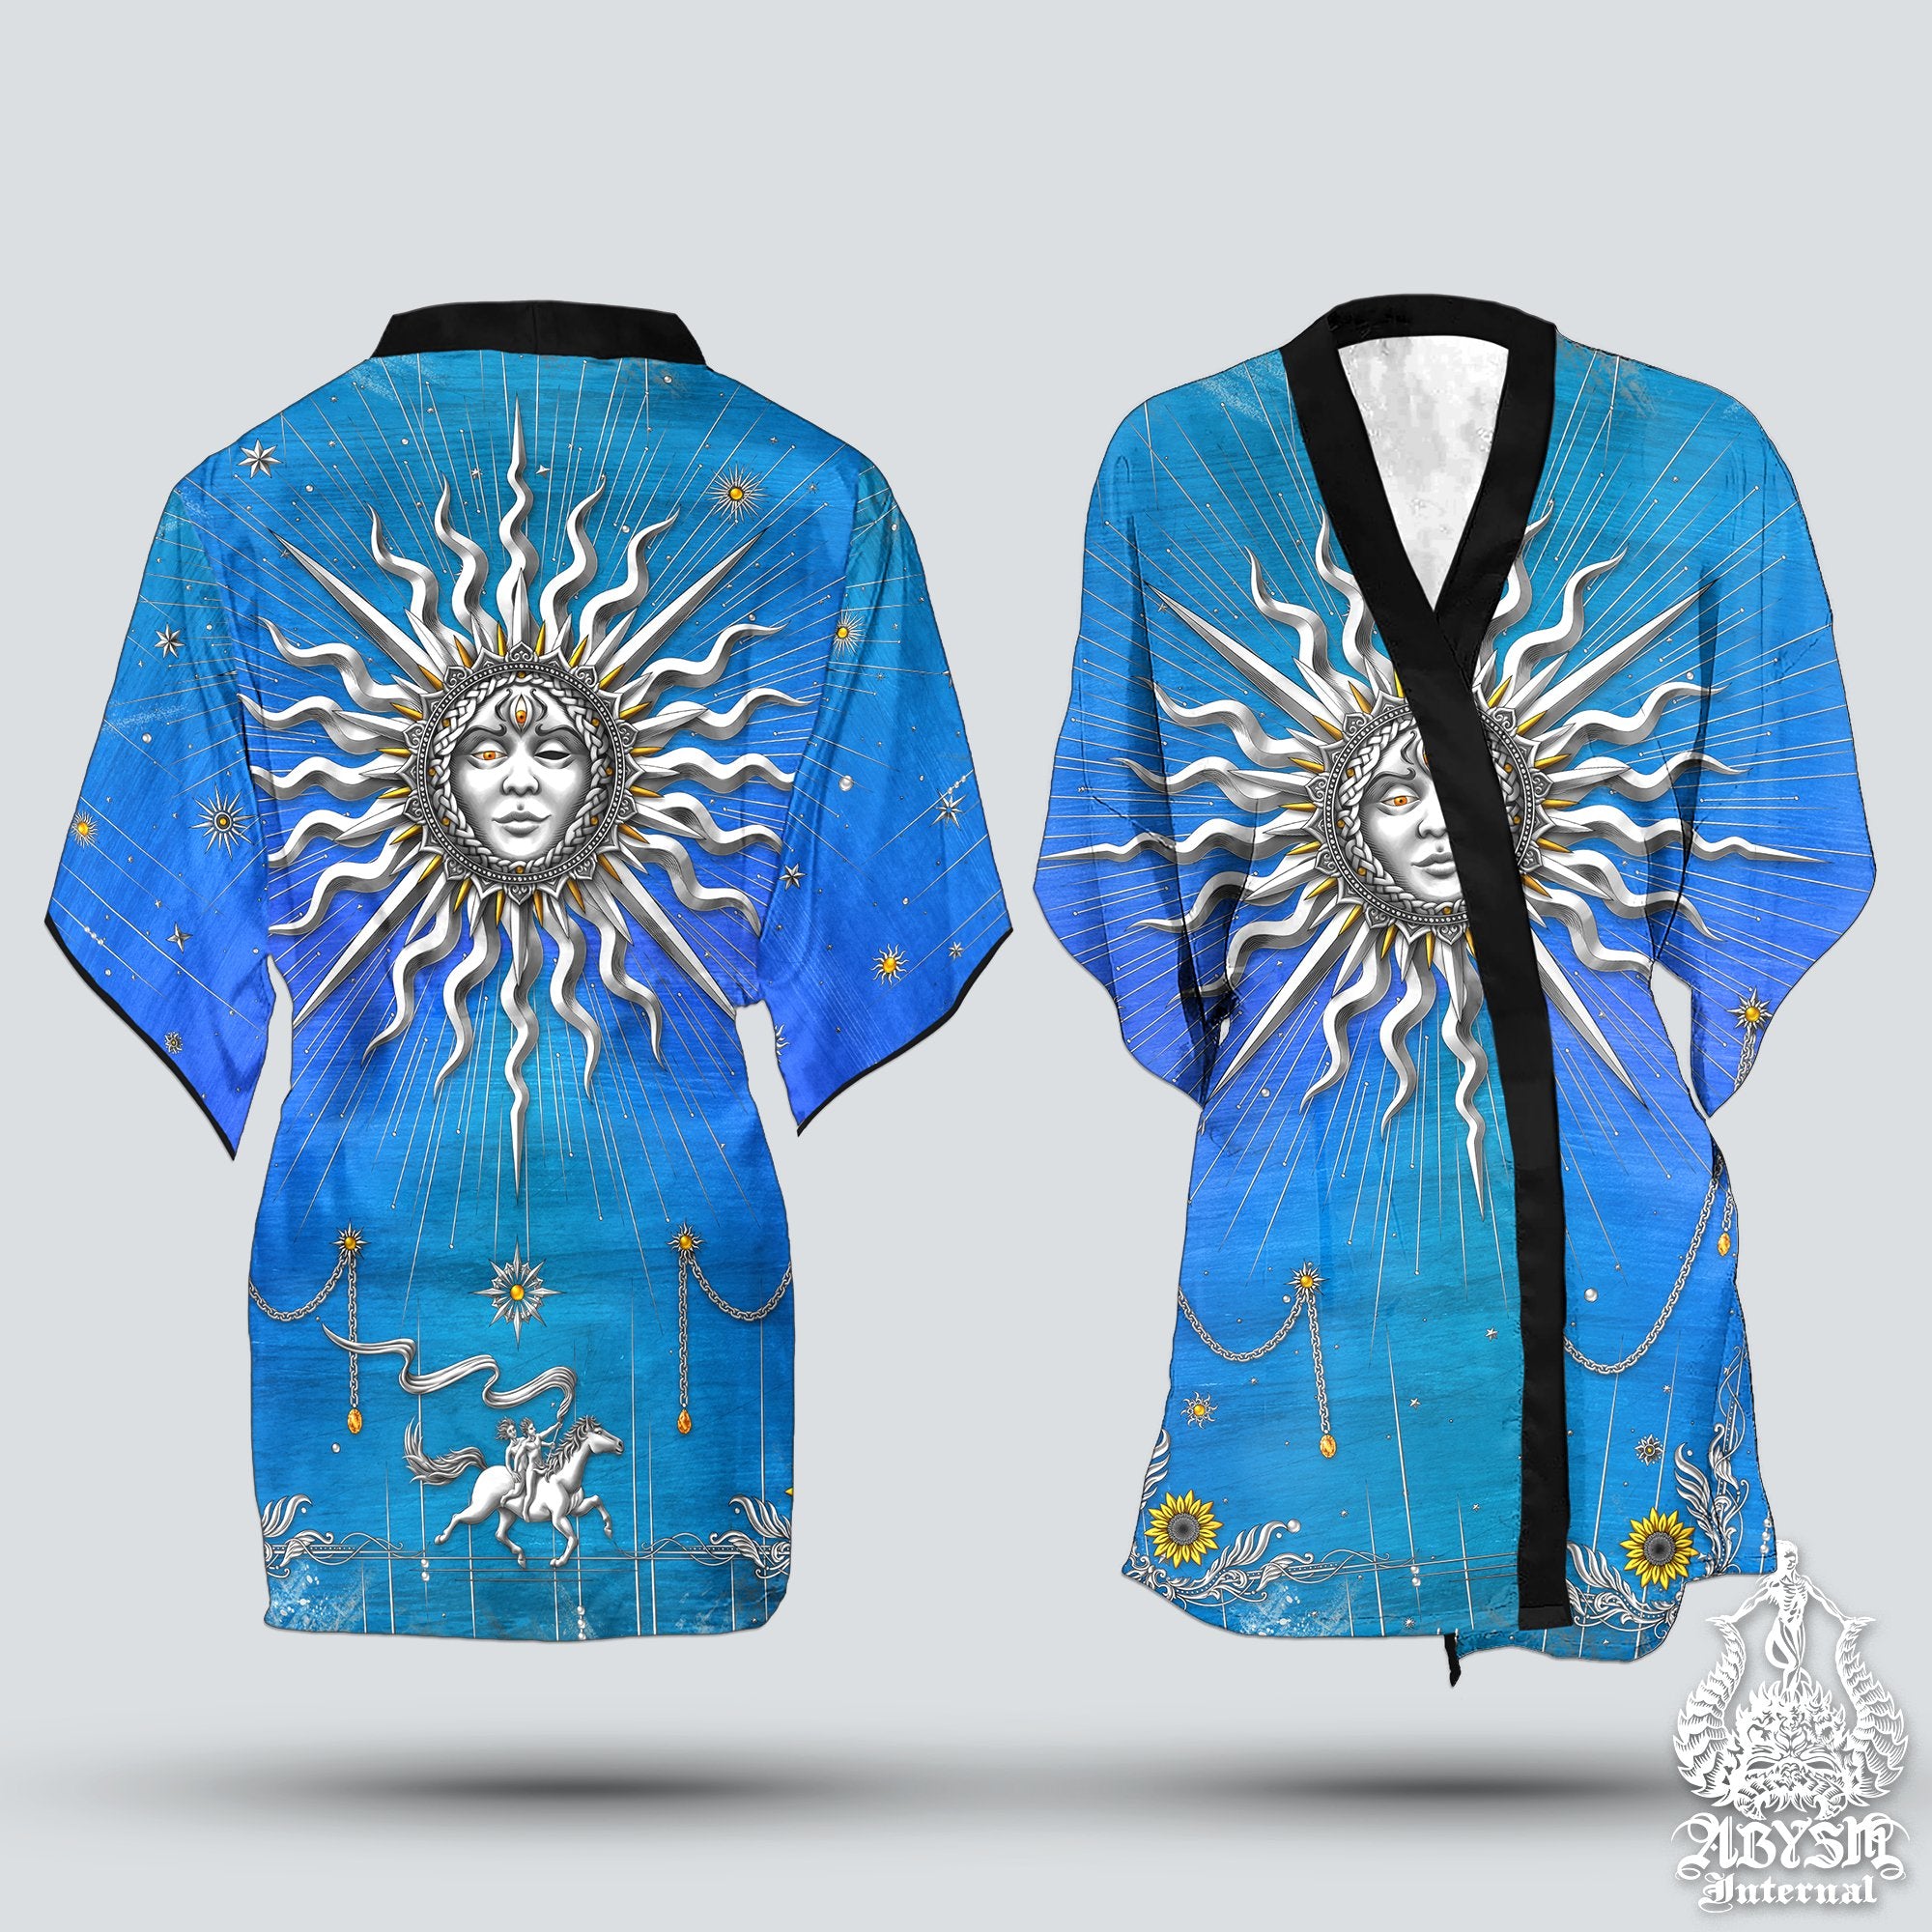 Silver Sun Short Kimono Robe, Colorful Beach Party Outfit, Tarot Arcana Coverup, Boho Summer Festival, Indie Clothing, Unisex - 7 Colors - Abysm Internal